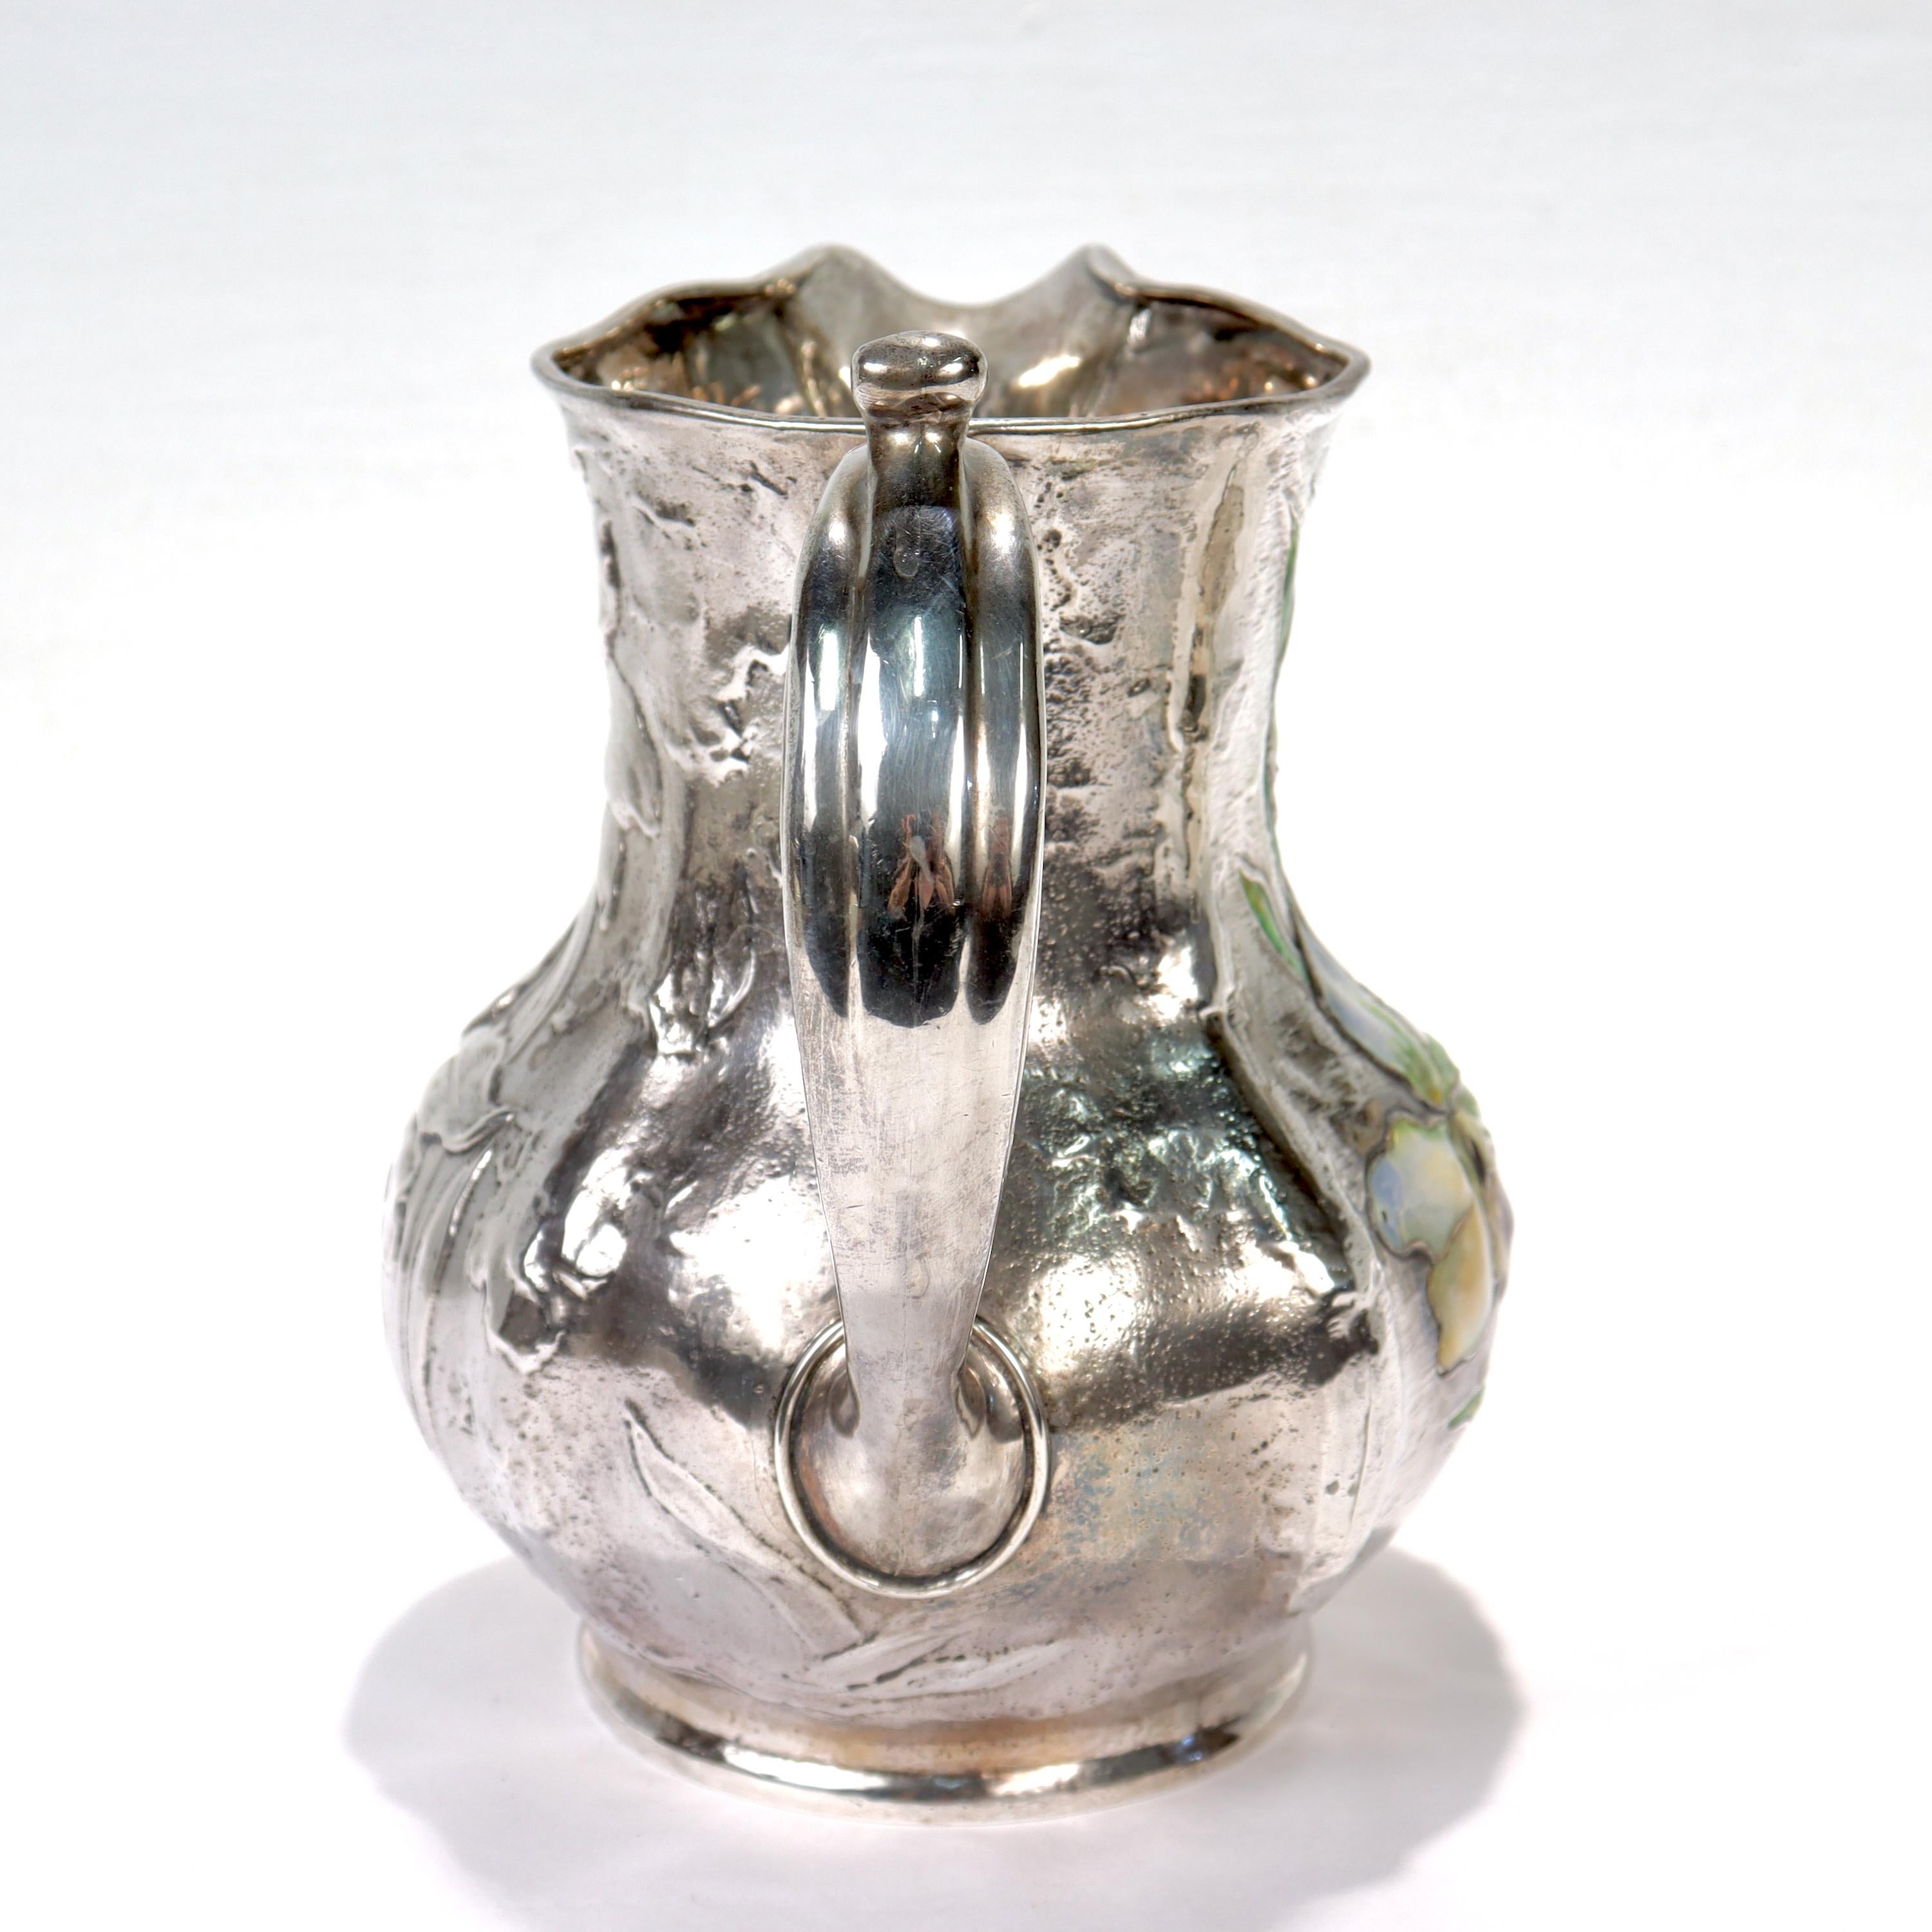 Antique Art Nouveau Gorham Sterling Silver Pitcher or Ewer with Enamel Flowers For Sale 1